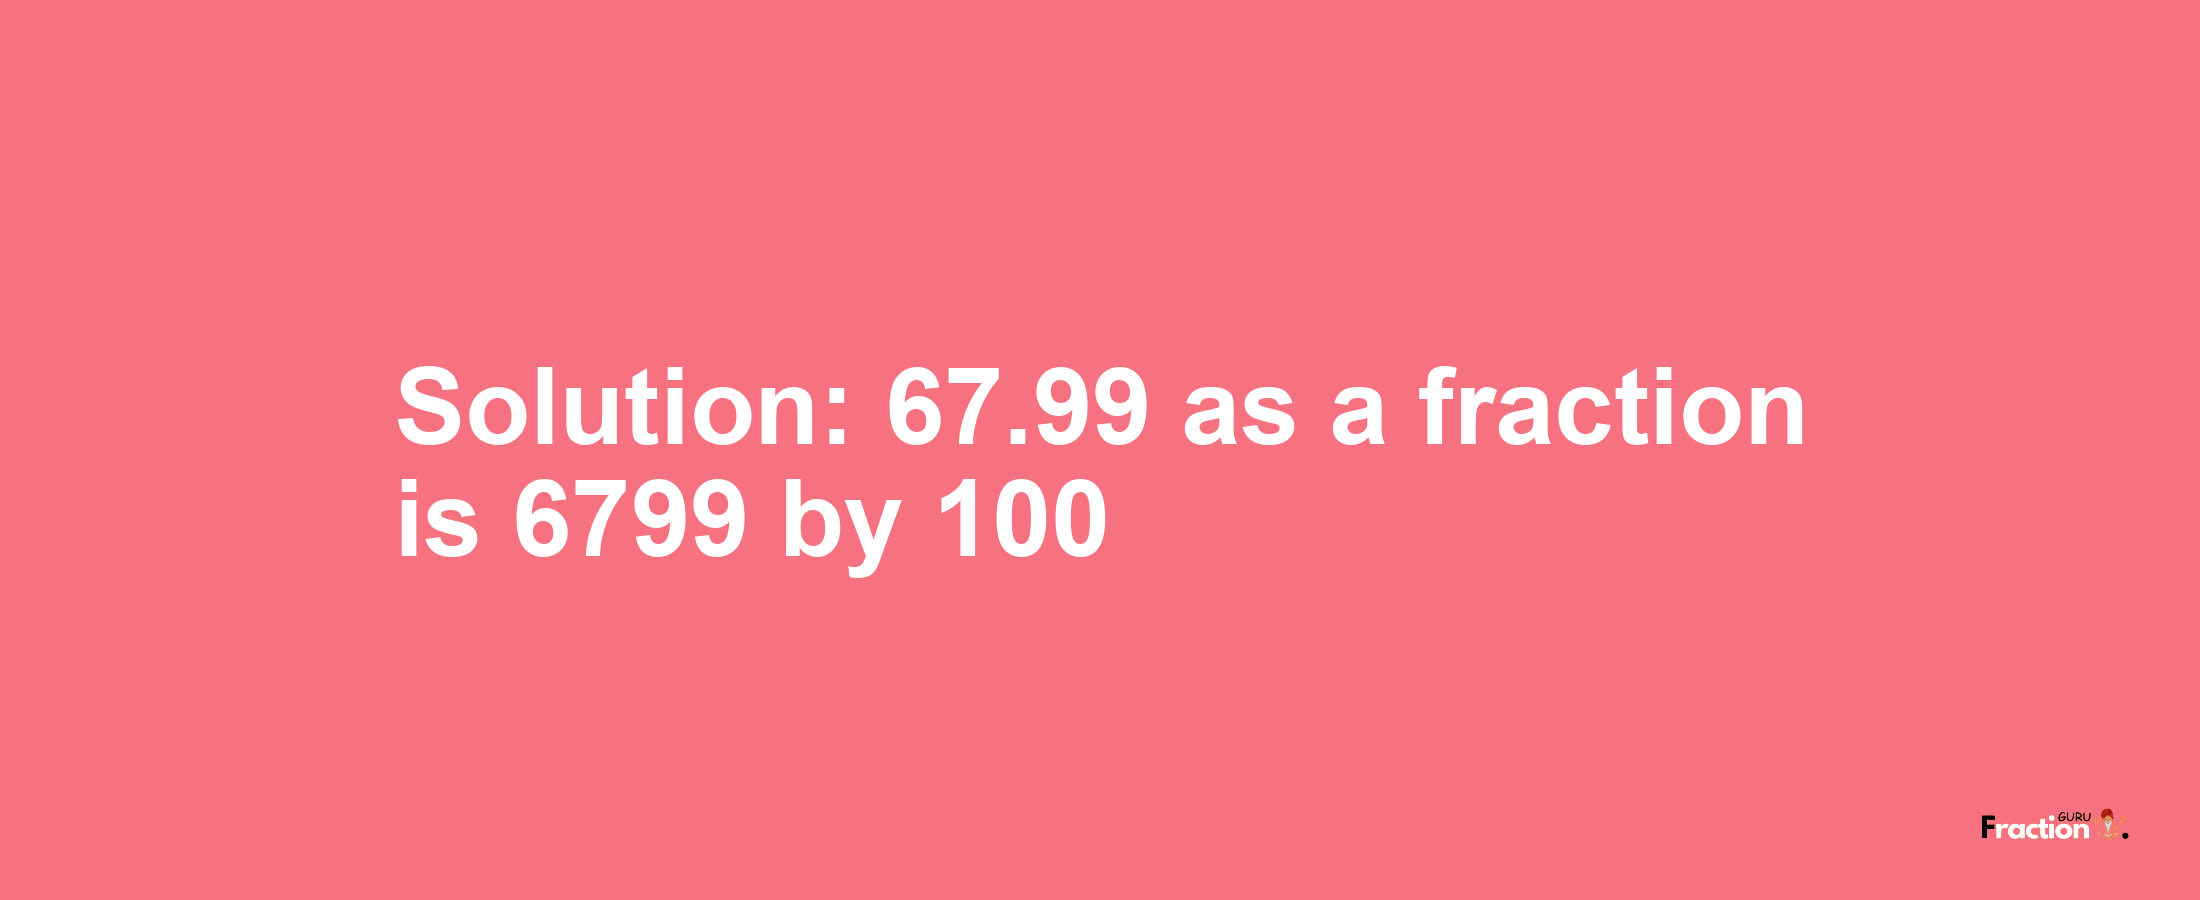 Solution:67.99 as a fraction is 6799/100